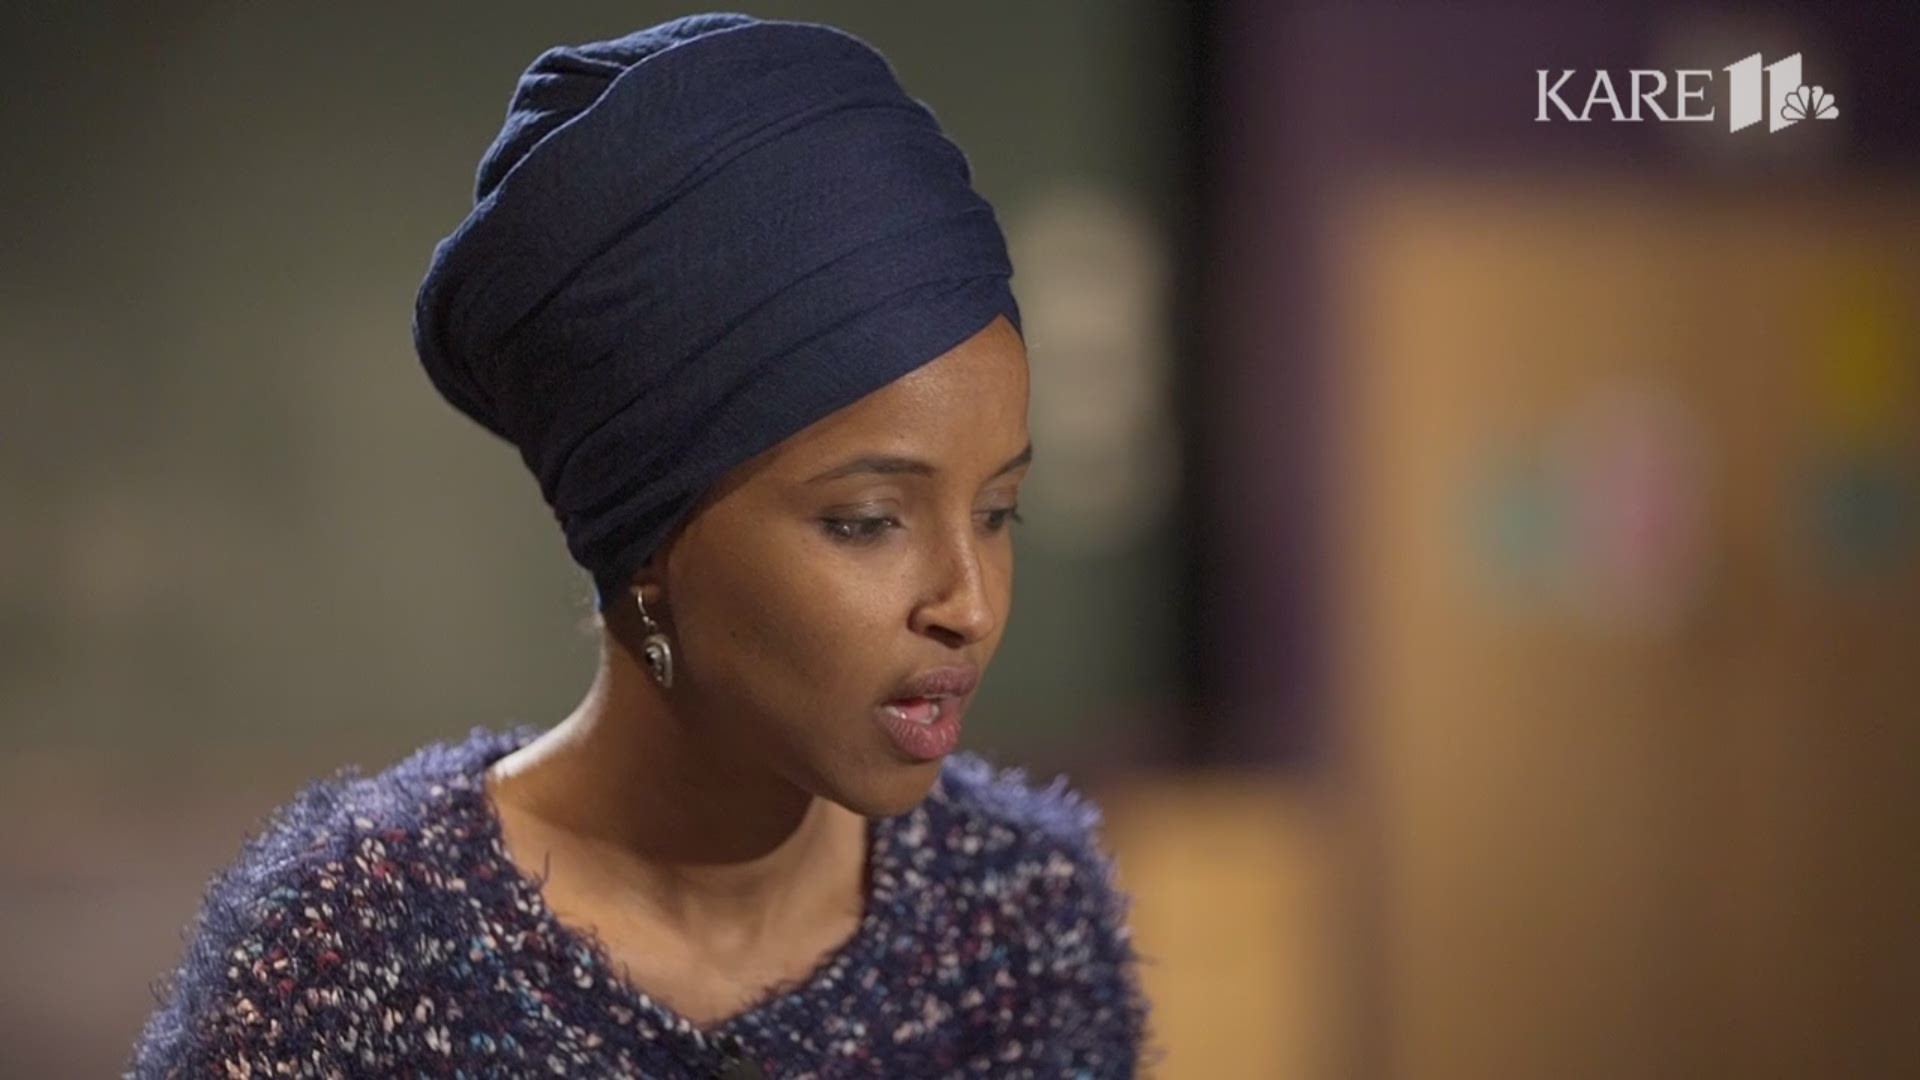 Ilhan Omar's remarks have led some to call her anti-Semitic. KARE 11's Jana Shortal took that question directly to the congresswoman.